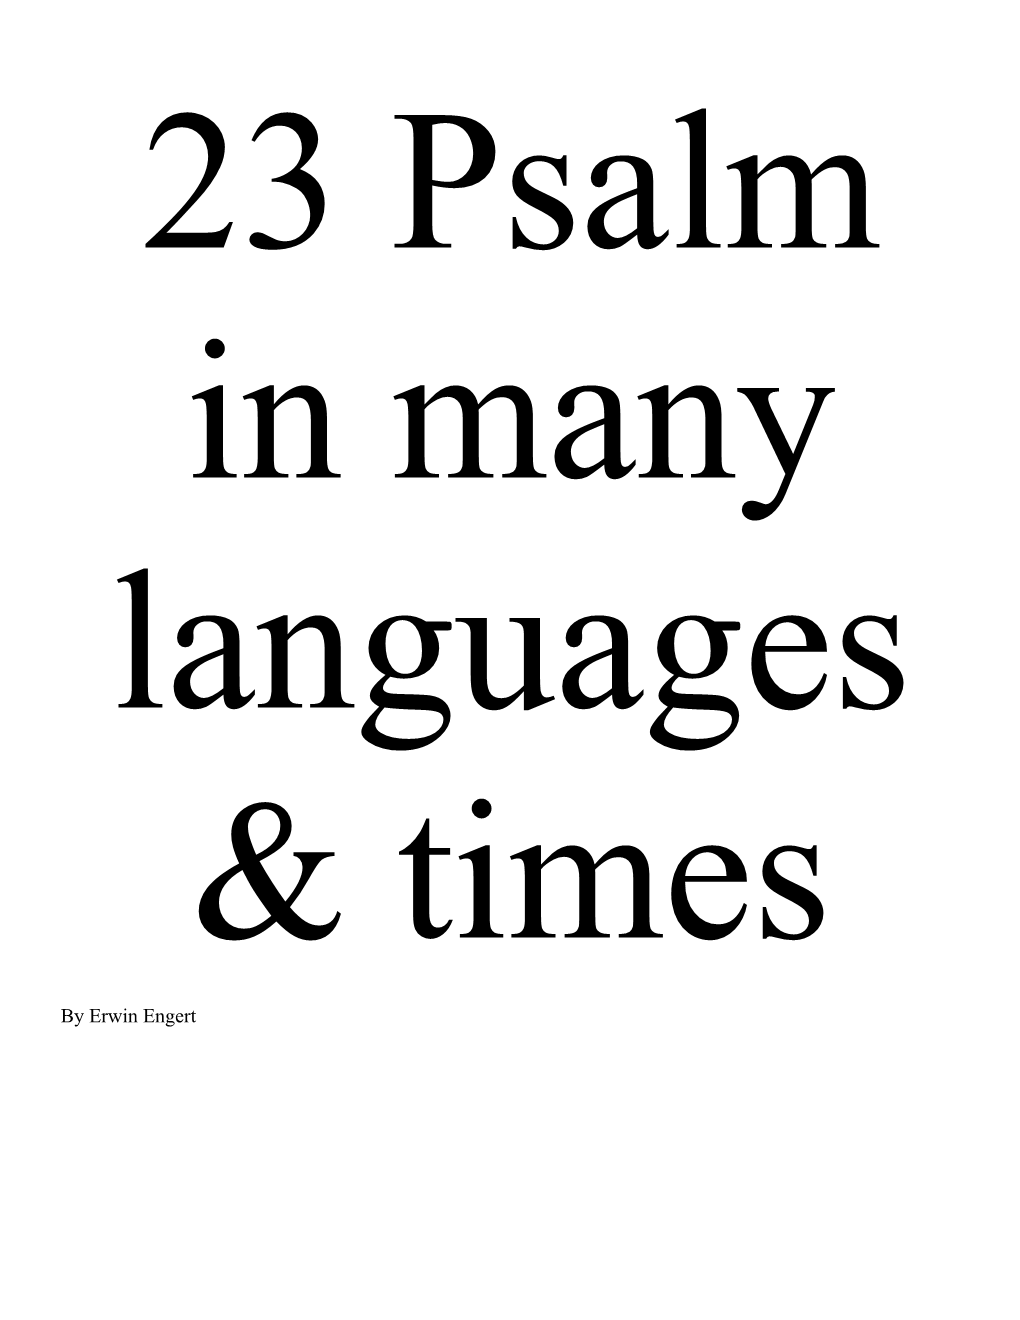 23 Psalm in Many Languages & Times